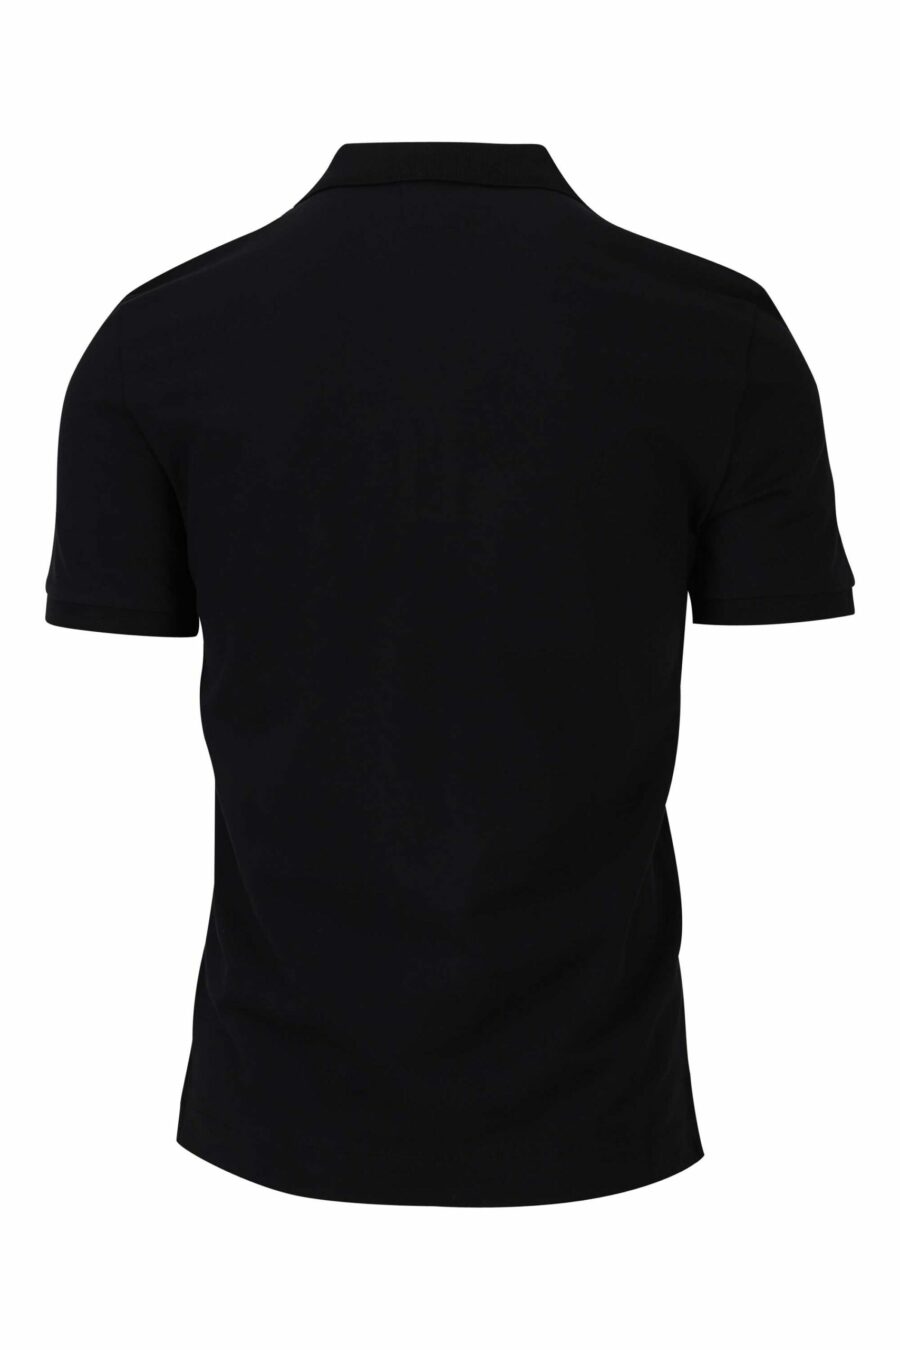 Black polo shirt with mini logo patch - 7620943564884 1 1 scaled